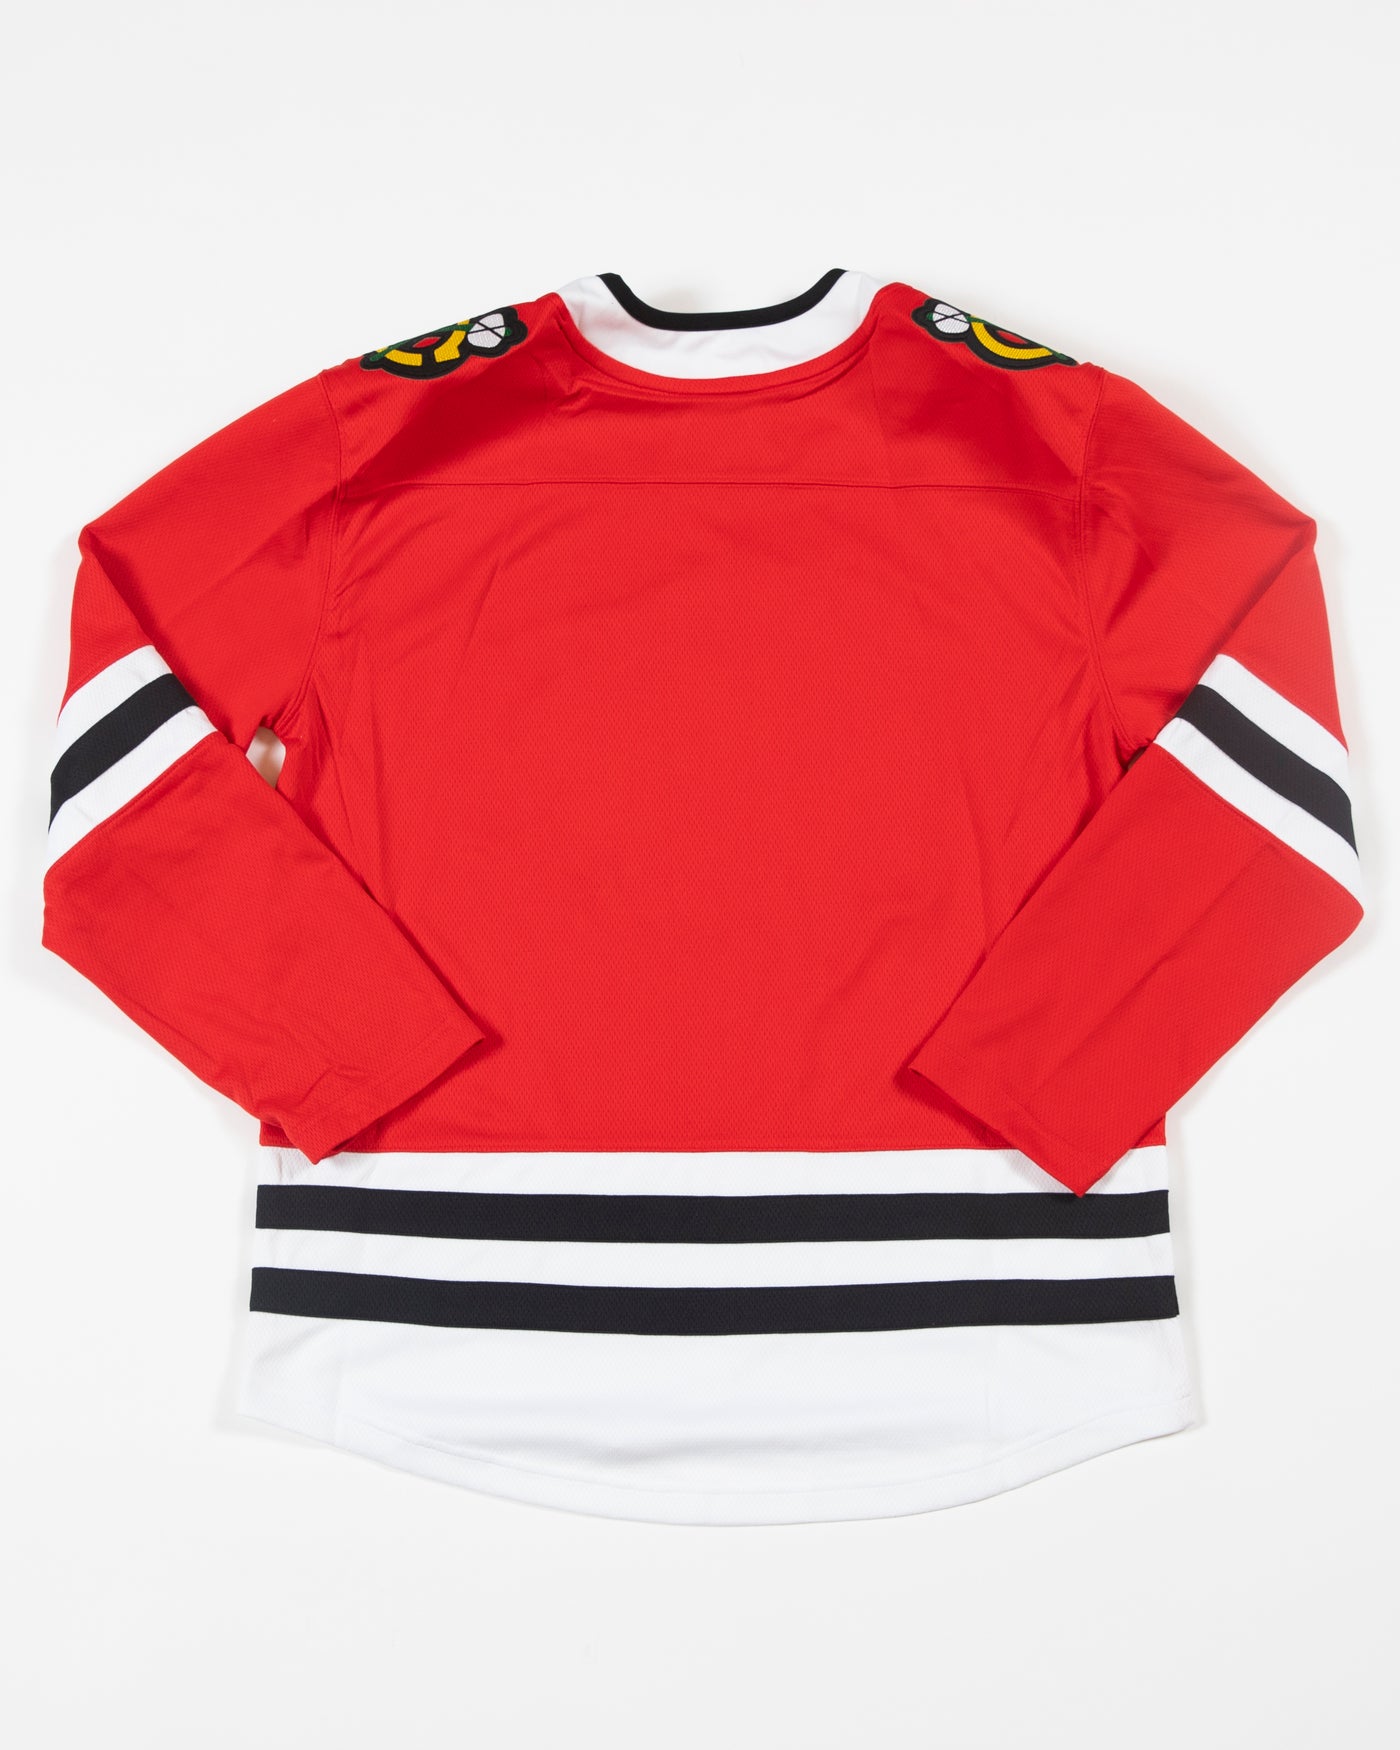 Lids Chicago Blackhawks Fanatics Branded Youth Home Replica Blank Jersey -  Red